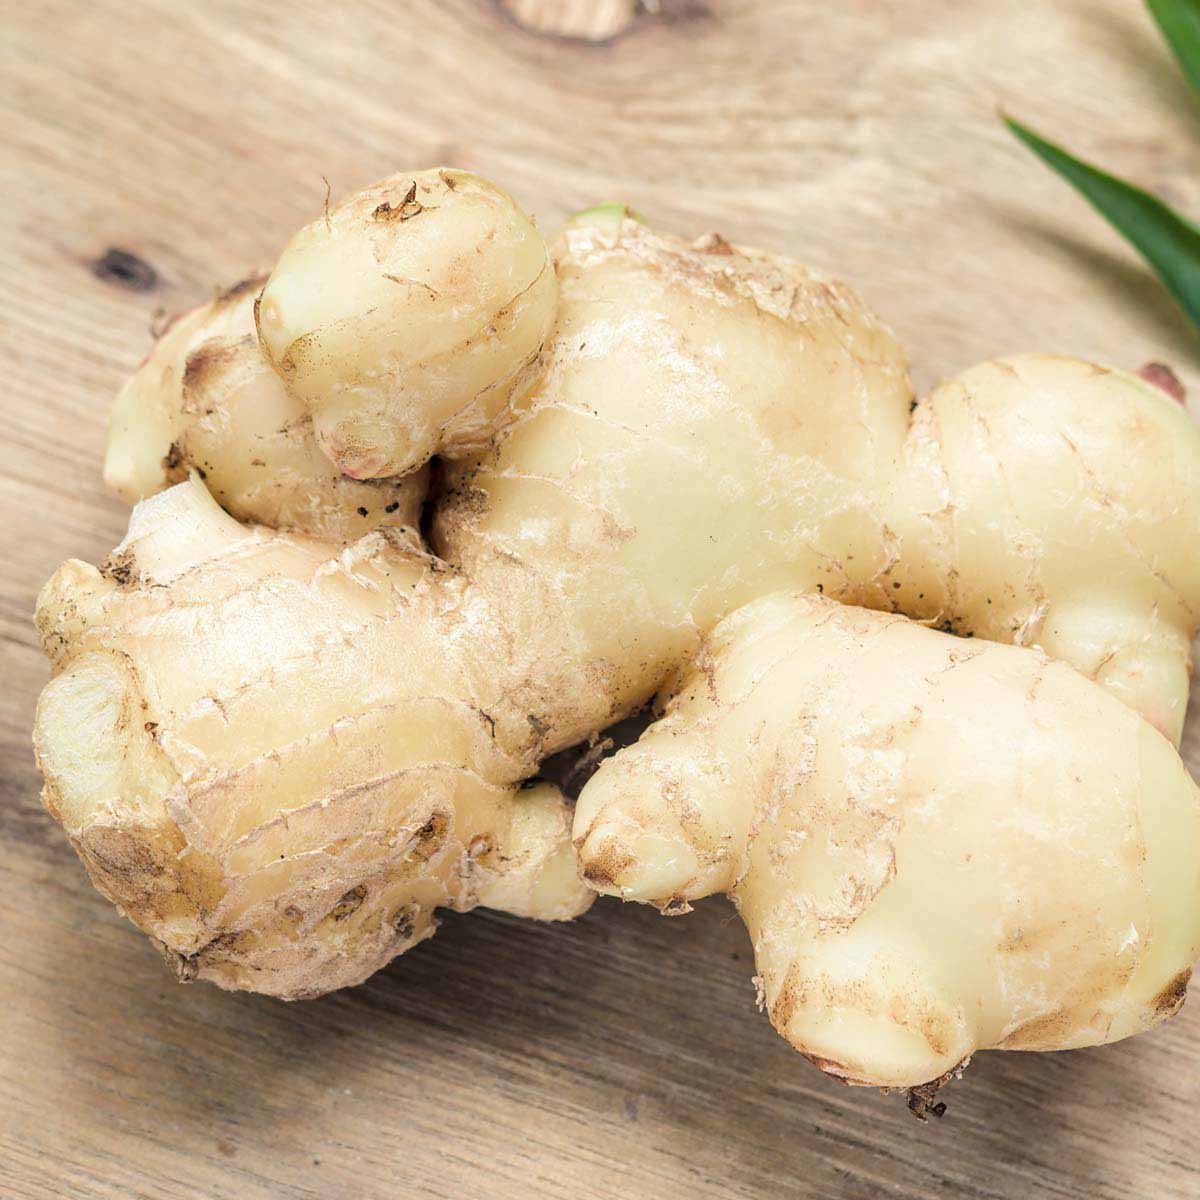 Large ginger root on table.